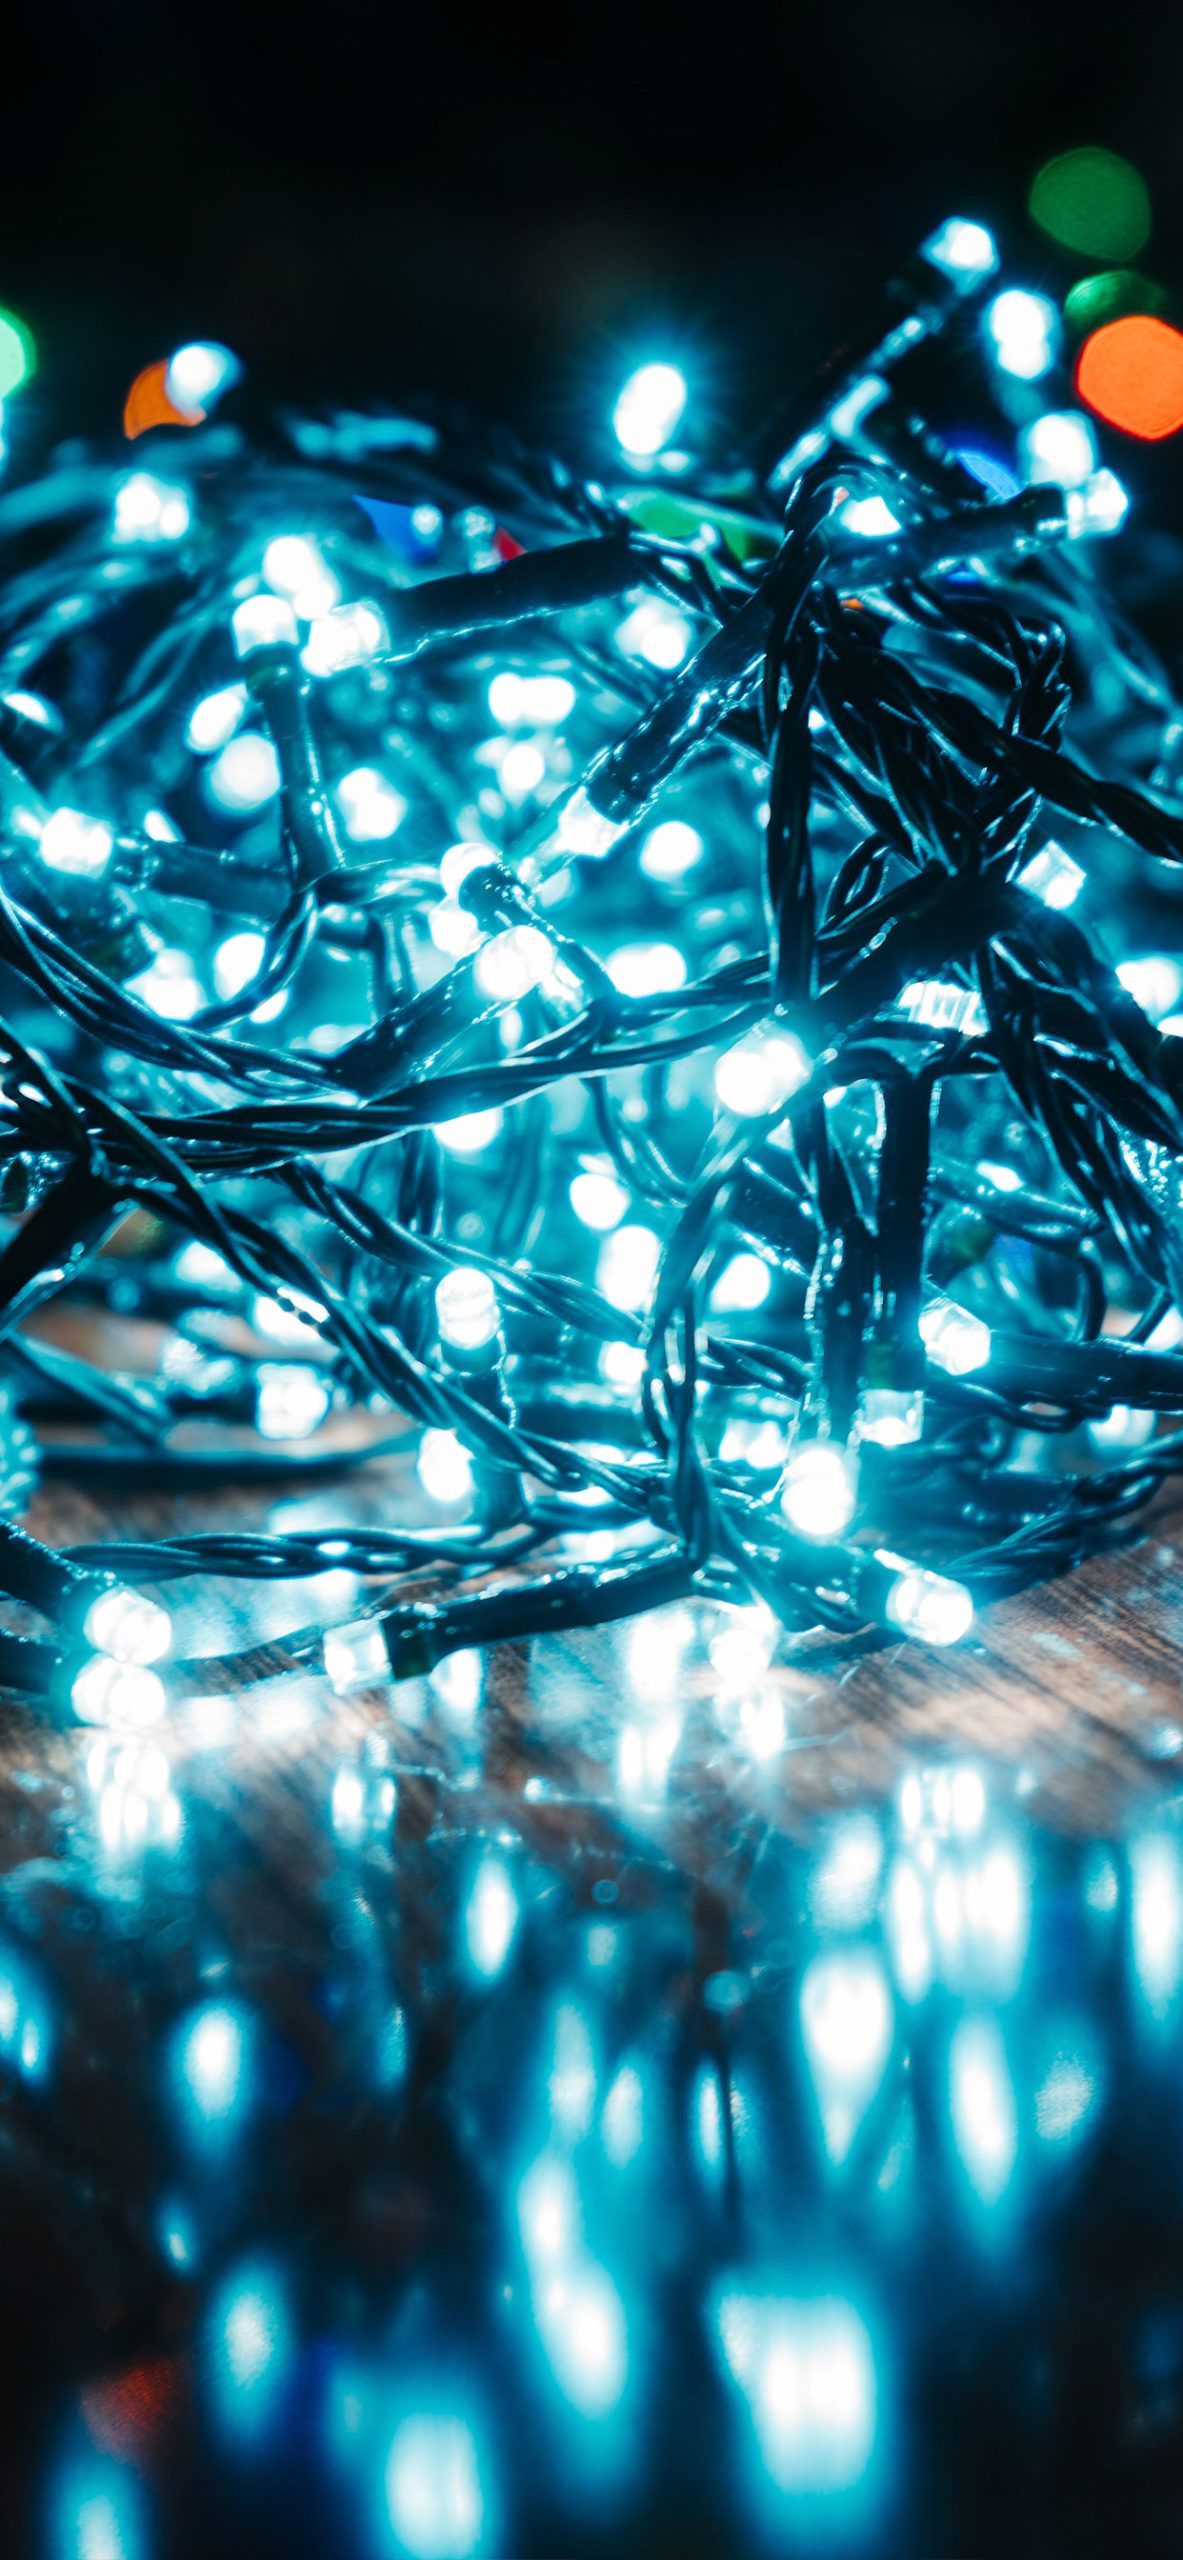 A string of blue Christmas lights on a wooden floor. - Christmas lights, fairy lights